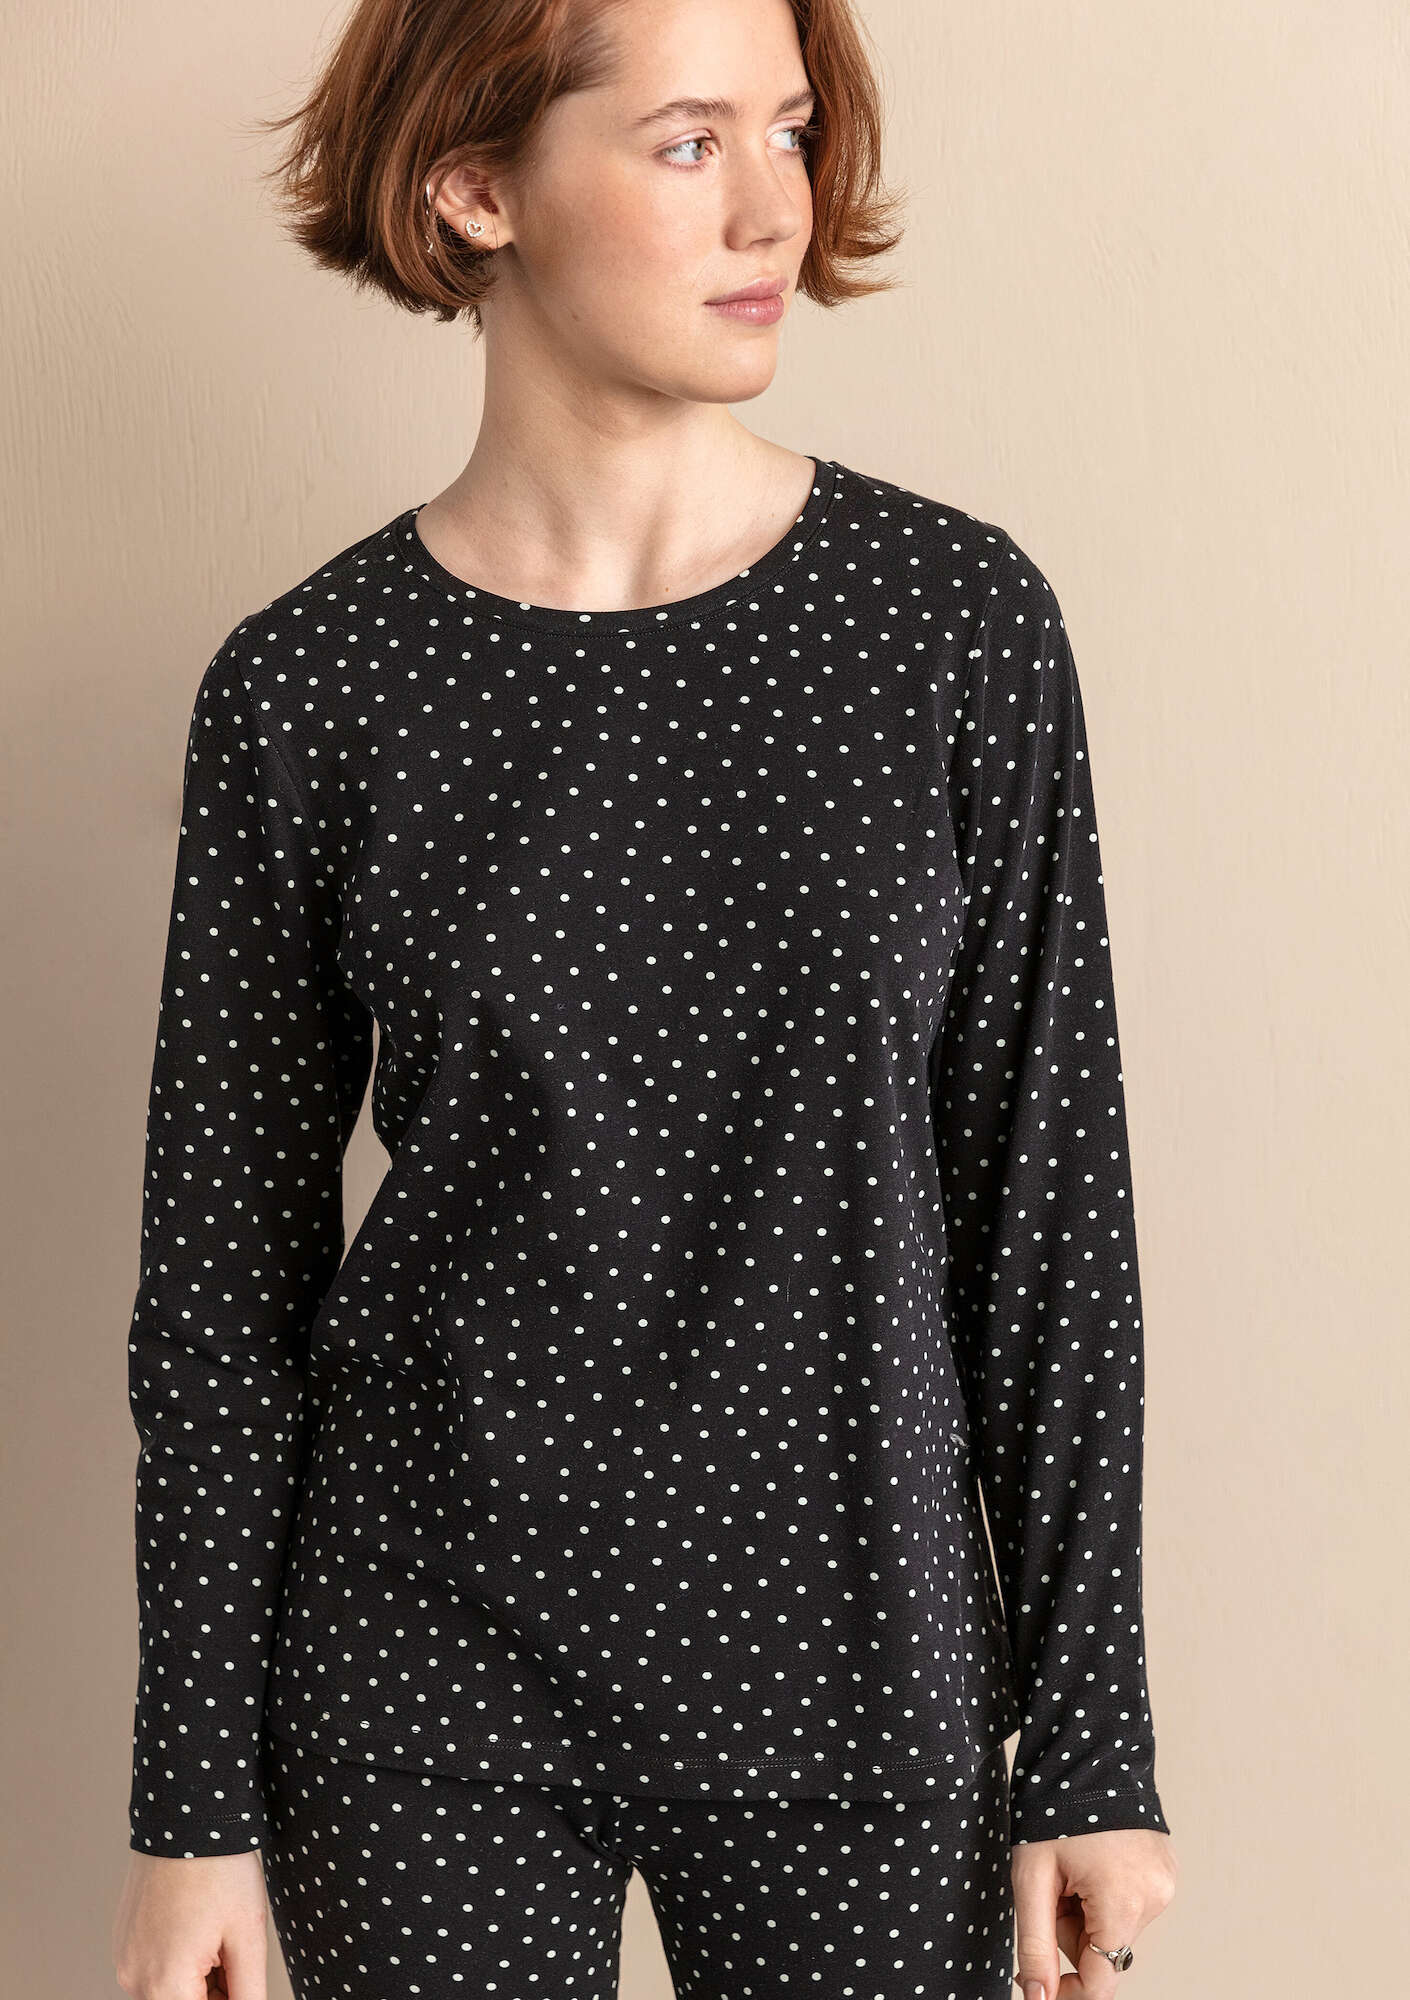 Tricot top Pytte black/patterned